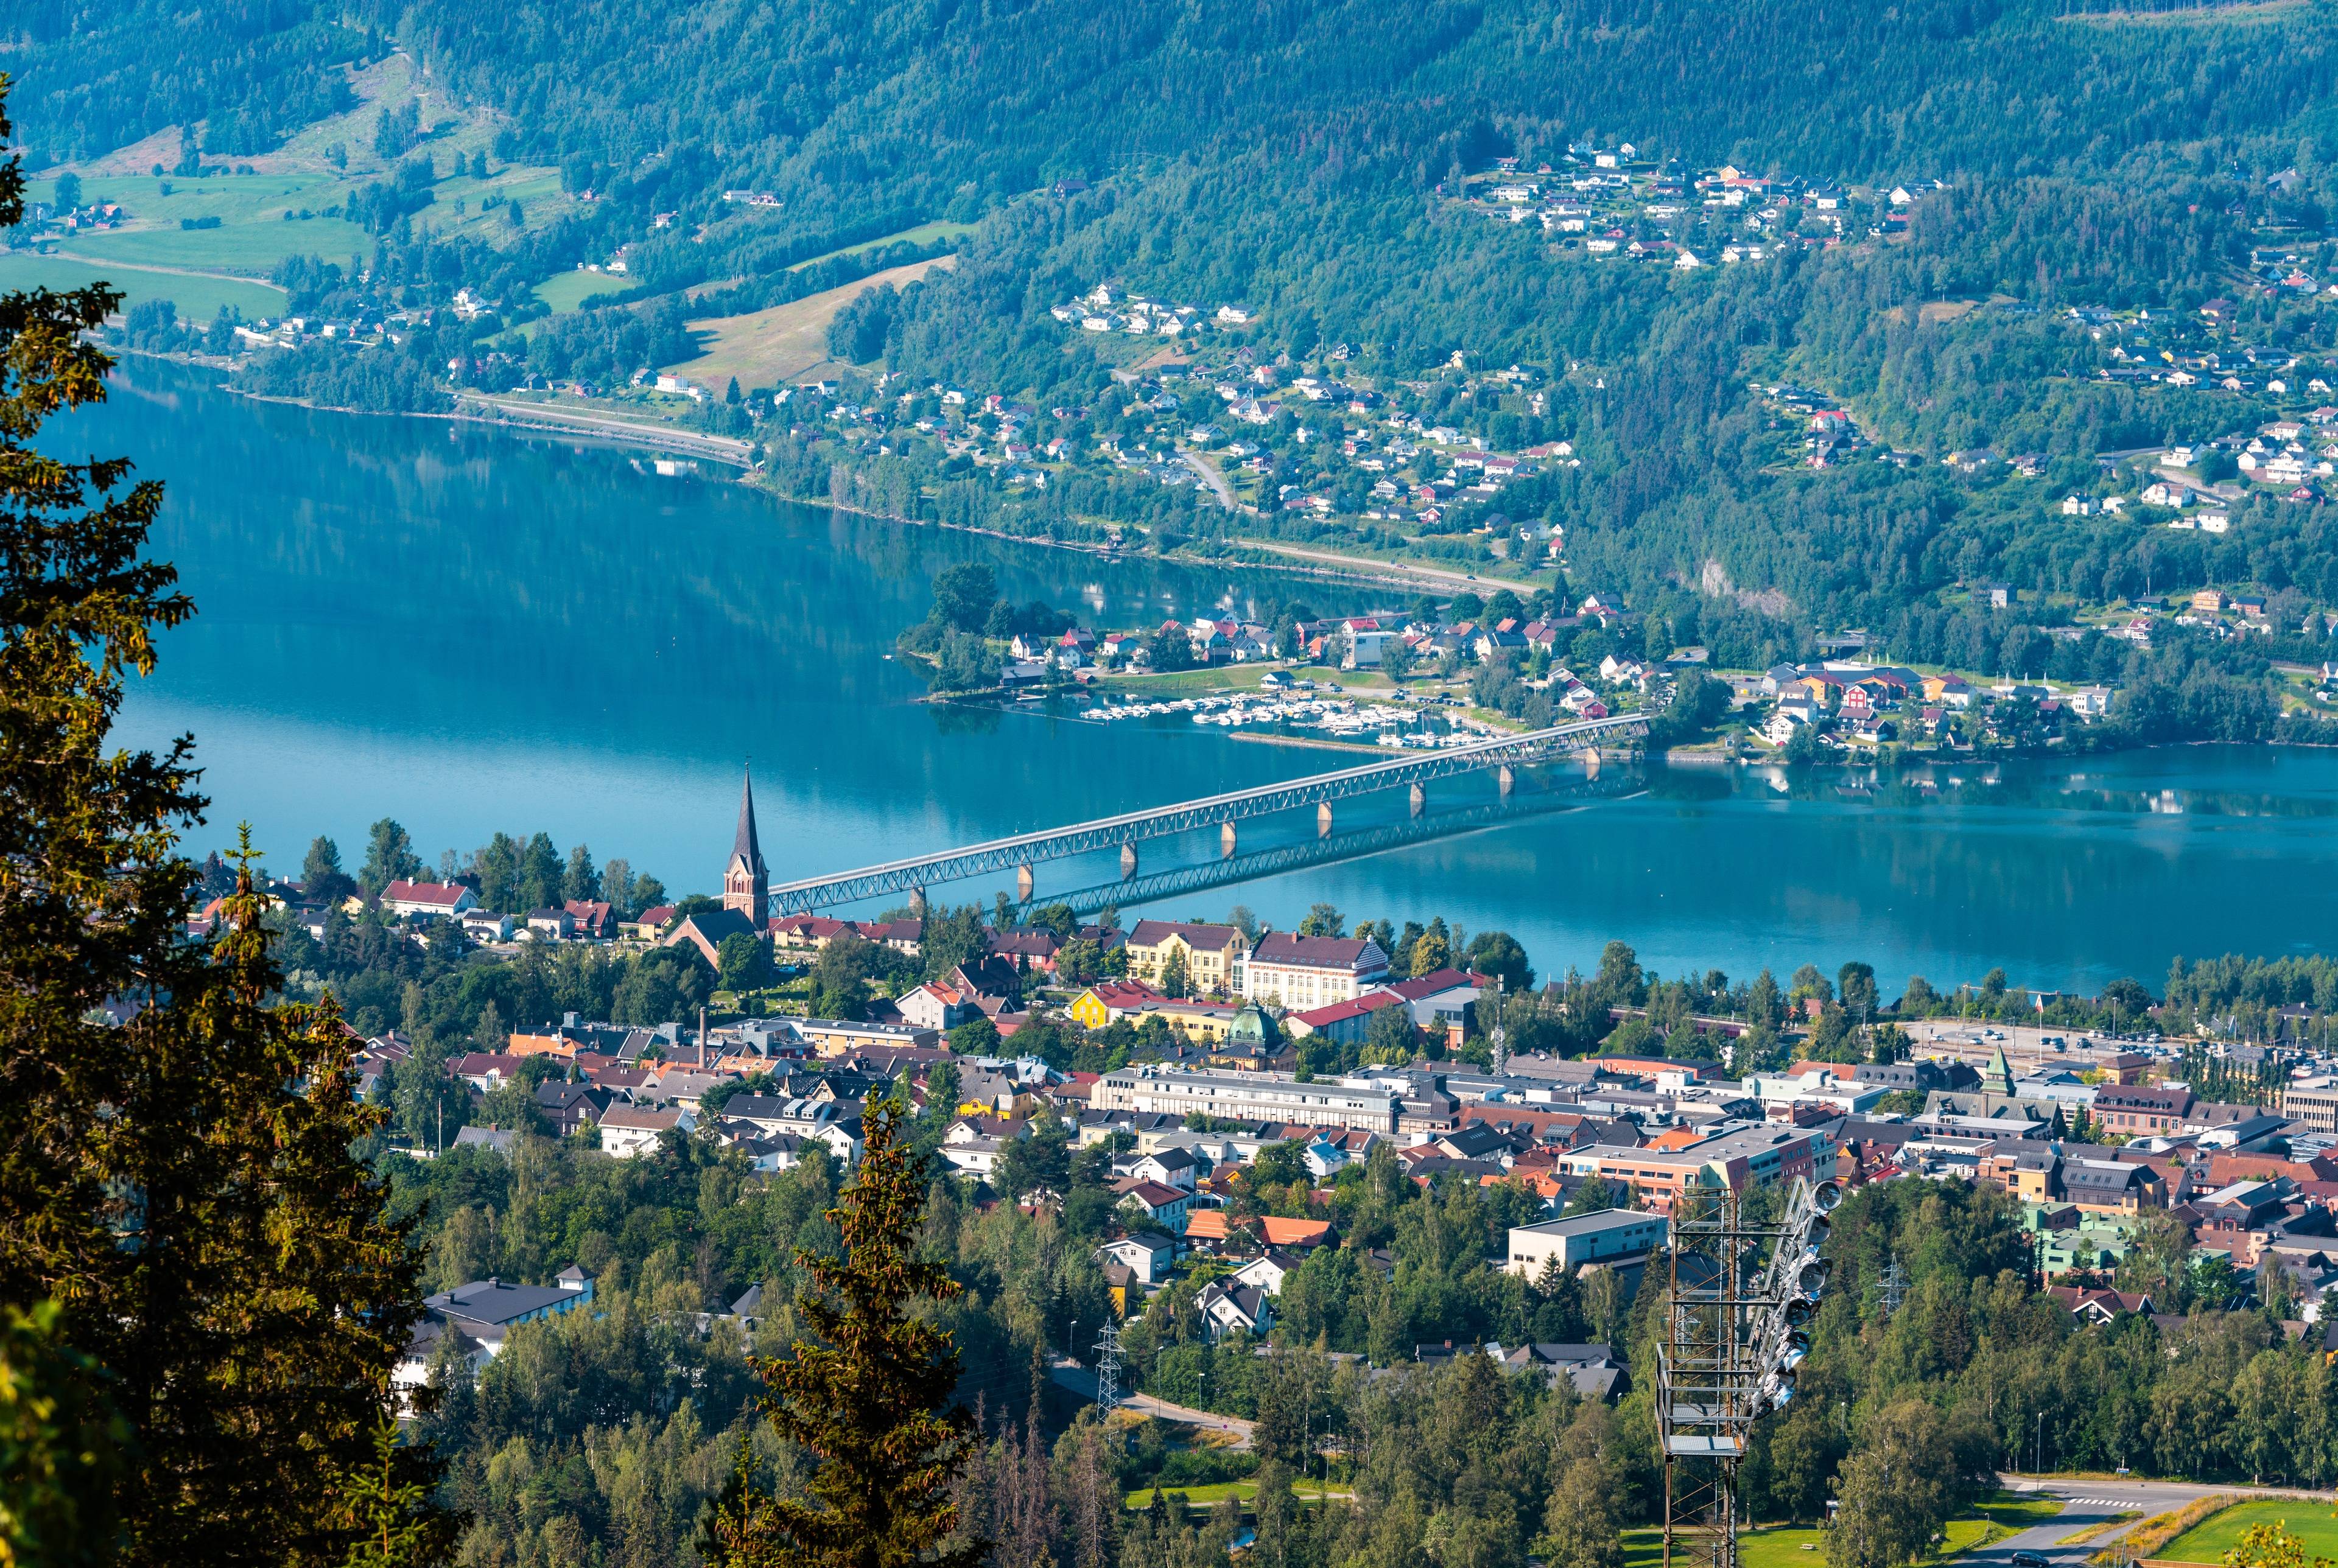 Day Trip From Oslo to Lillehammer: Step Back in Time